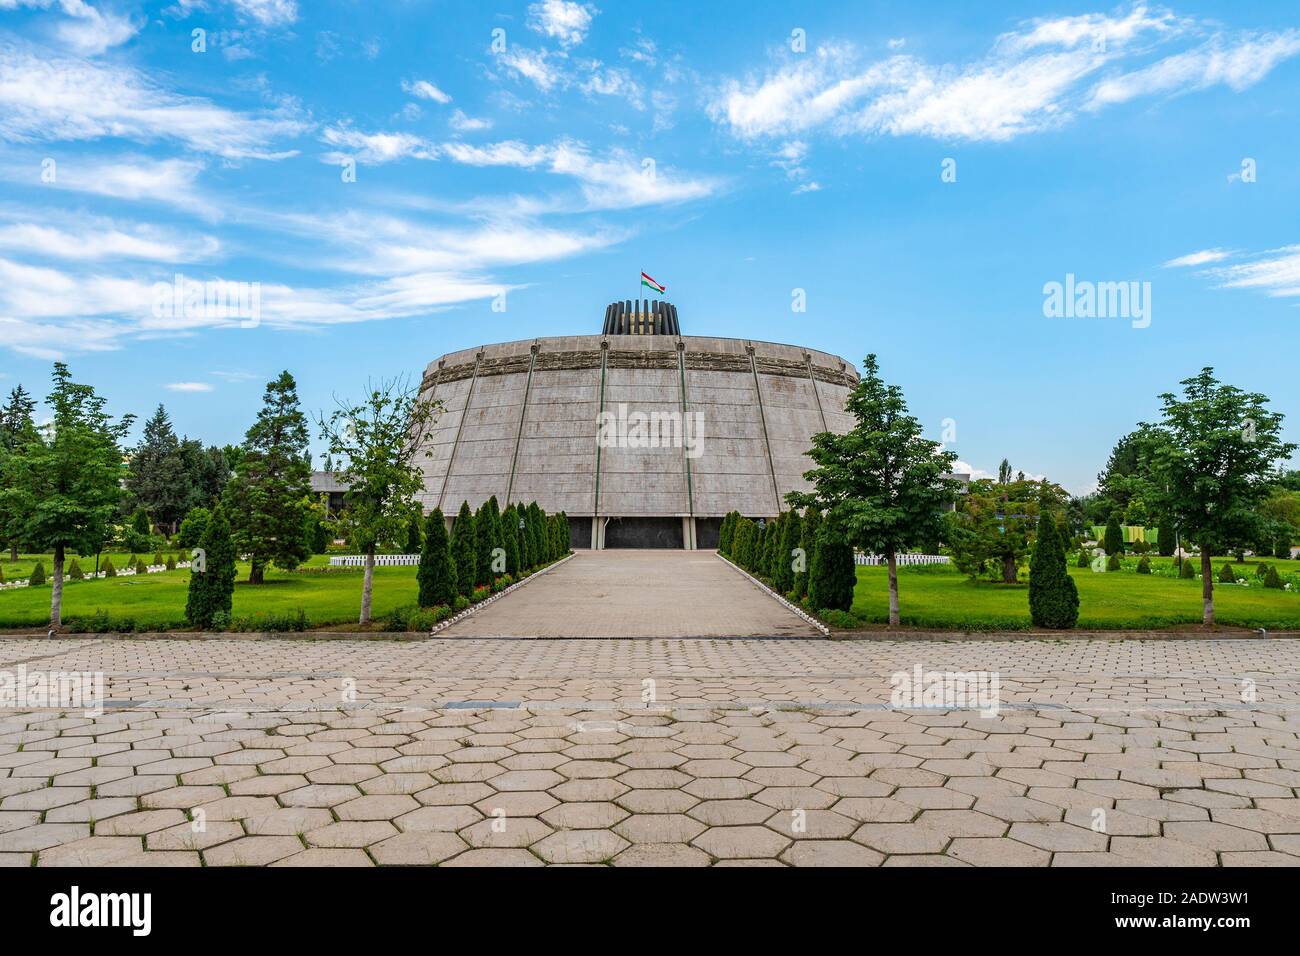 Dushanbe Concert Complex Kokhi Borbad Picturesque View from Ismoil Somoni Avenue on a Cloudy Rainy Day Stock Photo